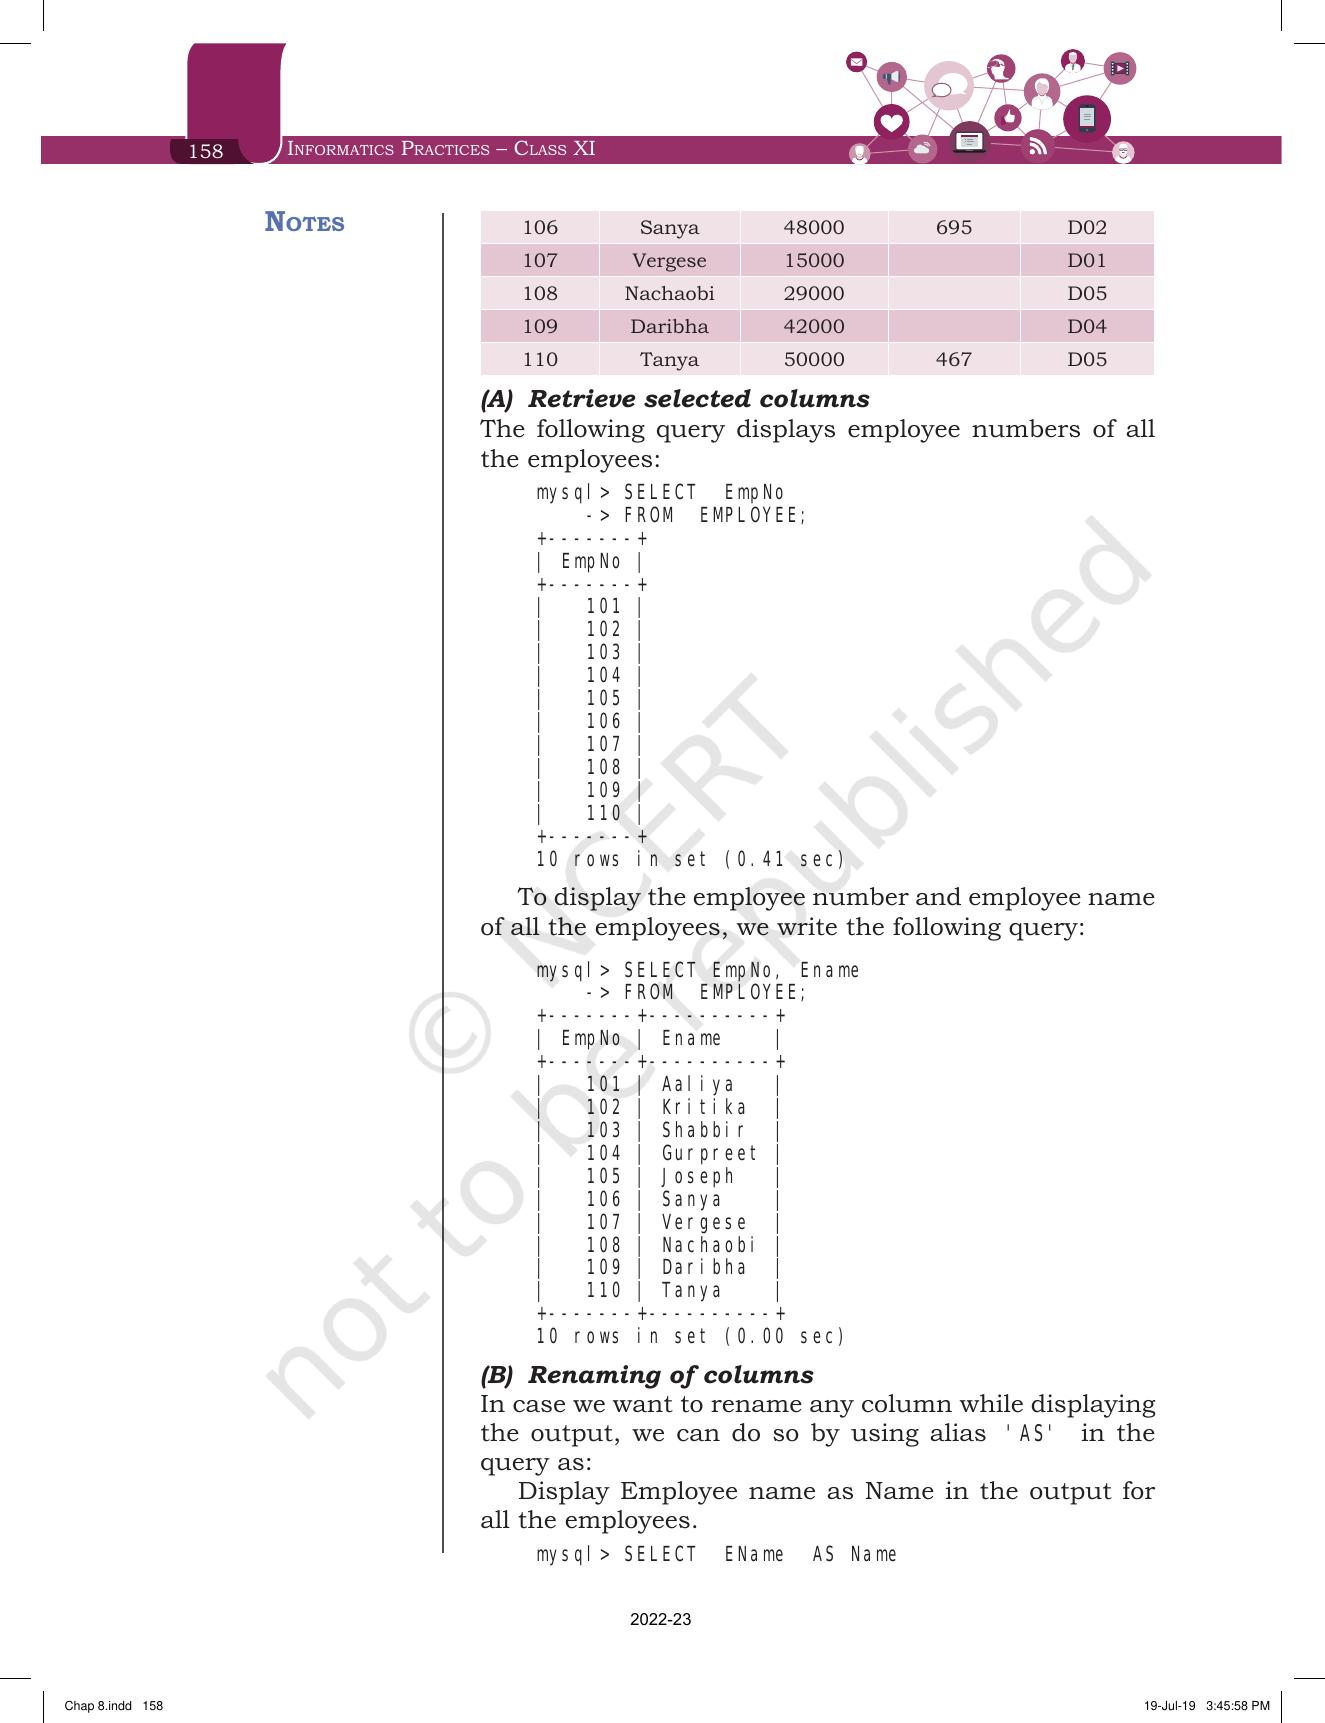 NCERT Book for Class 11 Informatics Practices Chapter 8 Introduction to Structured Query Language (SQL) - Page 16